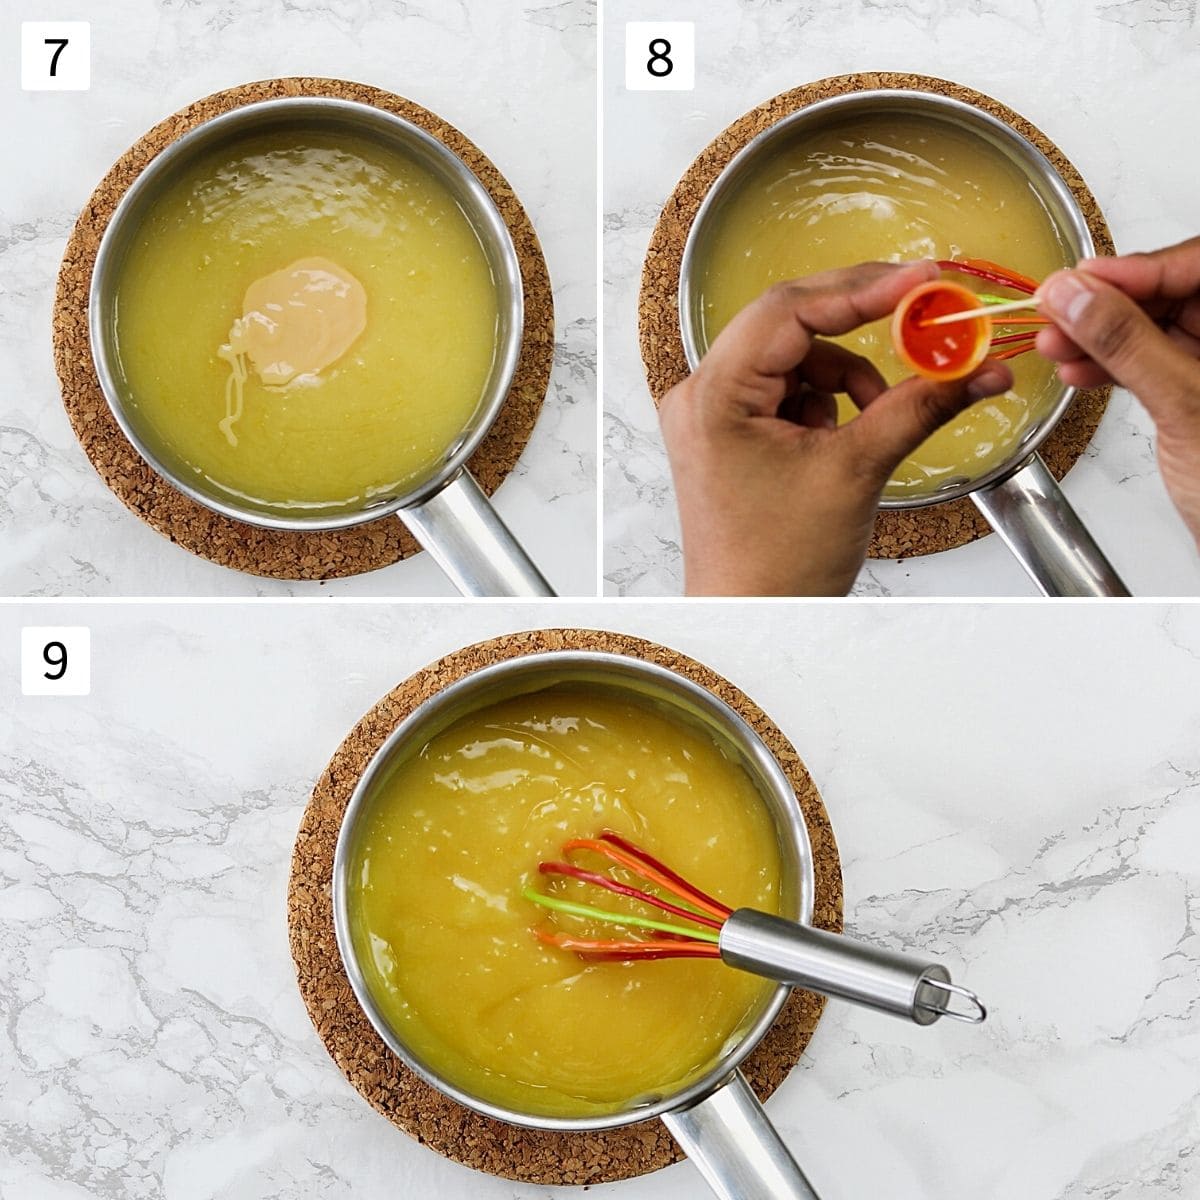 Collage of 3 steps showing adding condensed milk, yellow food color and whisking.